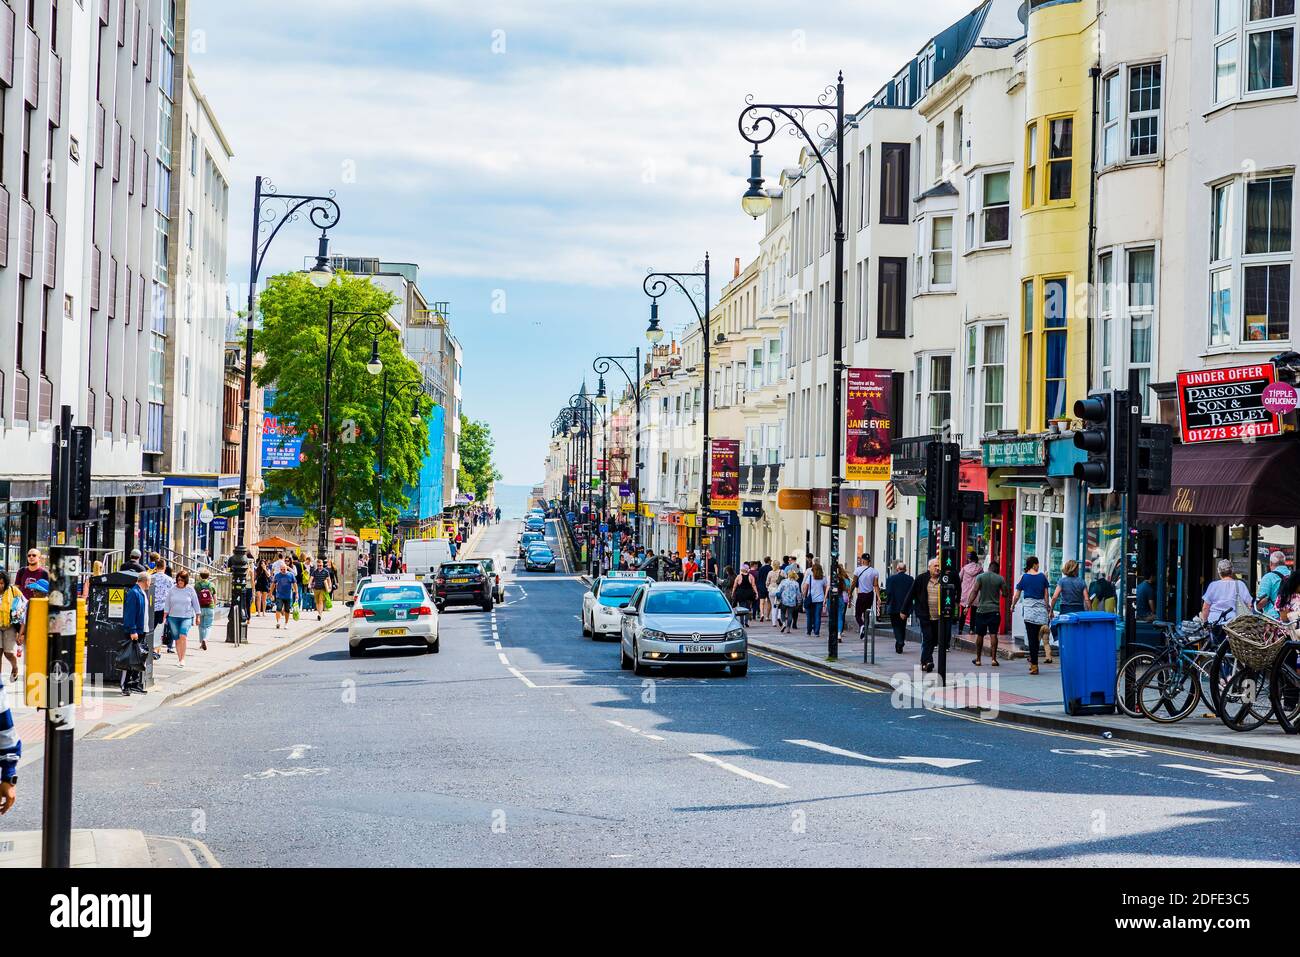 View of Queens Road. Brighton, East Sussex, England, United Kingdom, Europe Stock Photo